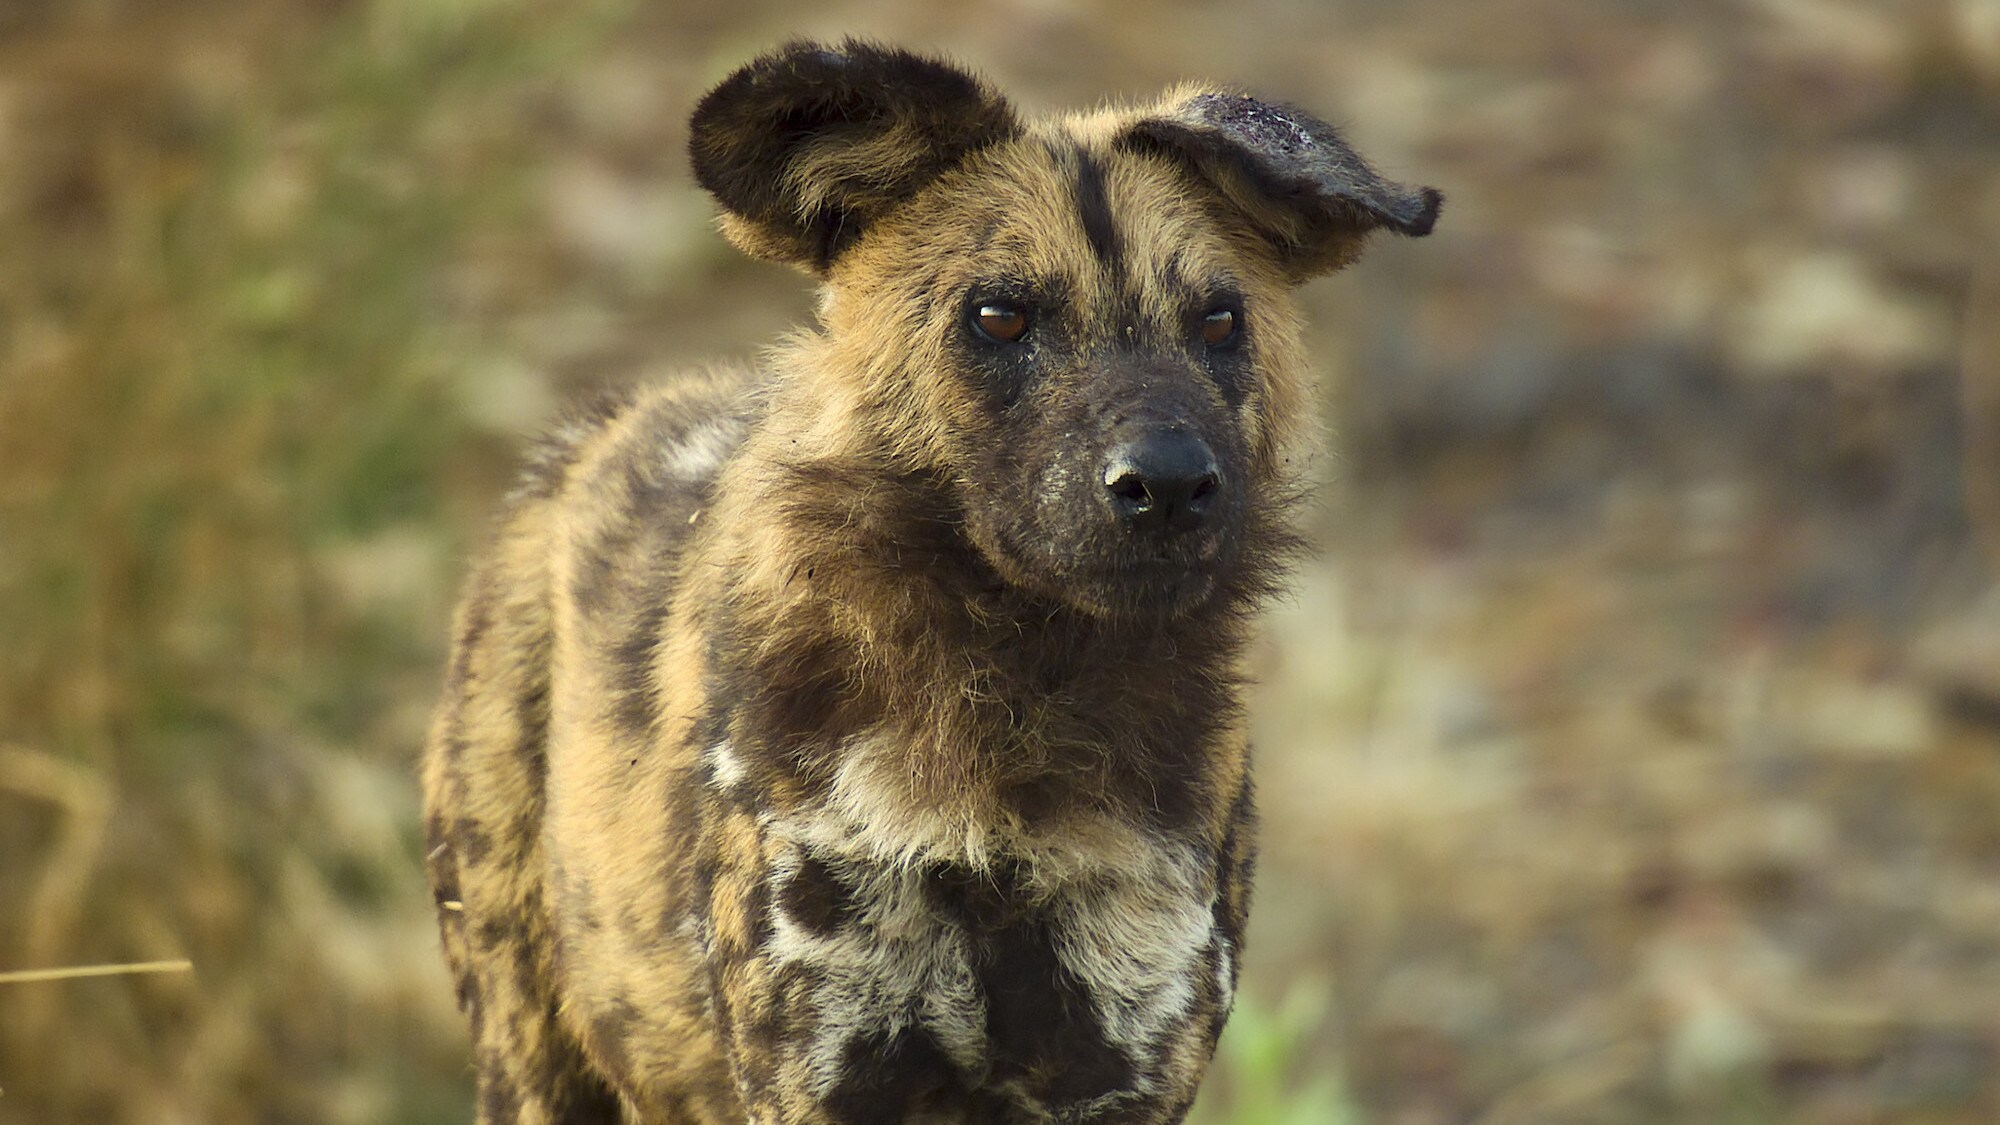 Wild Dog, with floppy ear, looking at camera. (National Geographic for Disney+/Bertie Gregory)